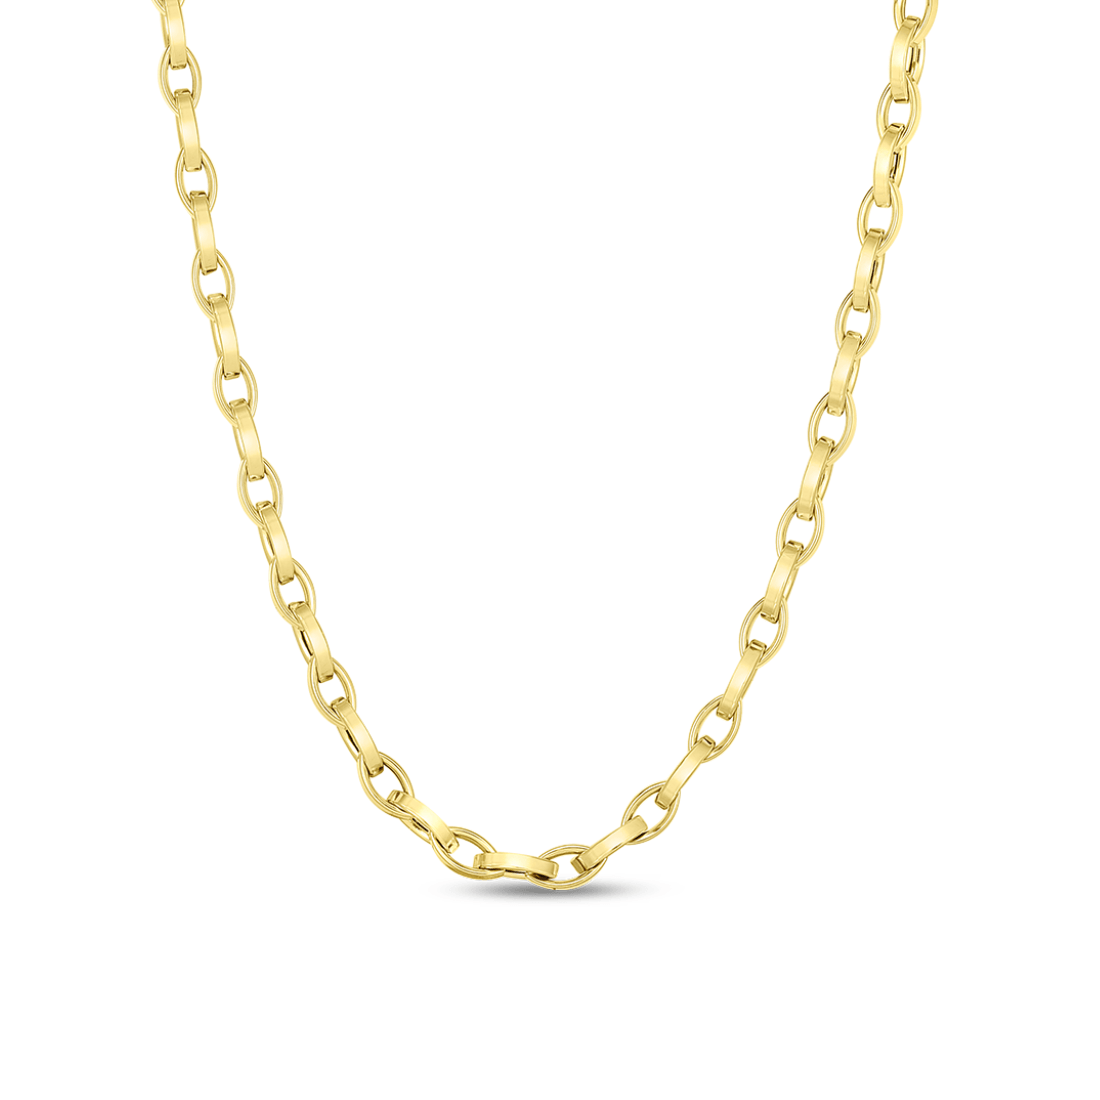 Roberto Coin Polished Almond Link Necklace
